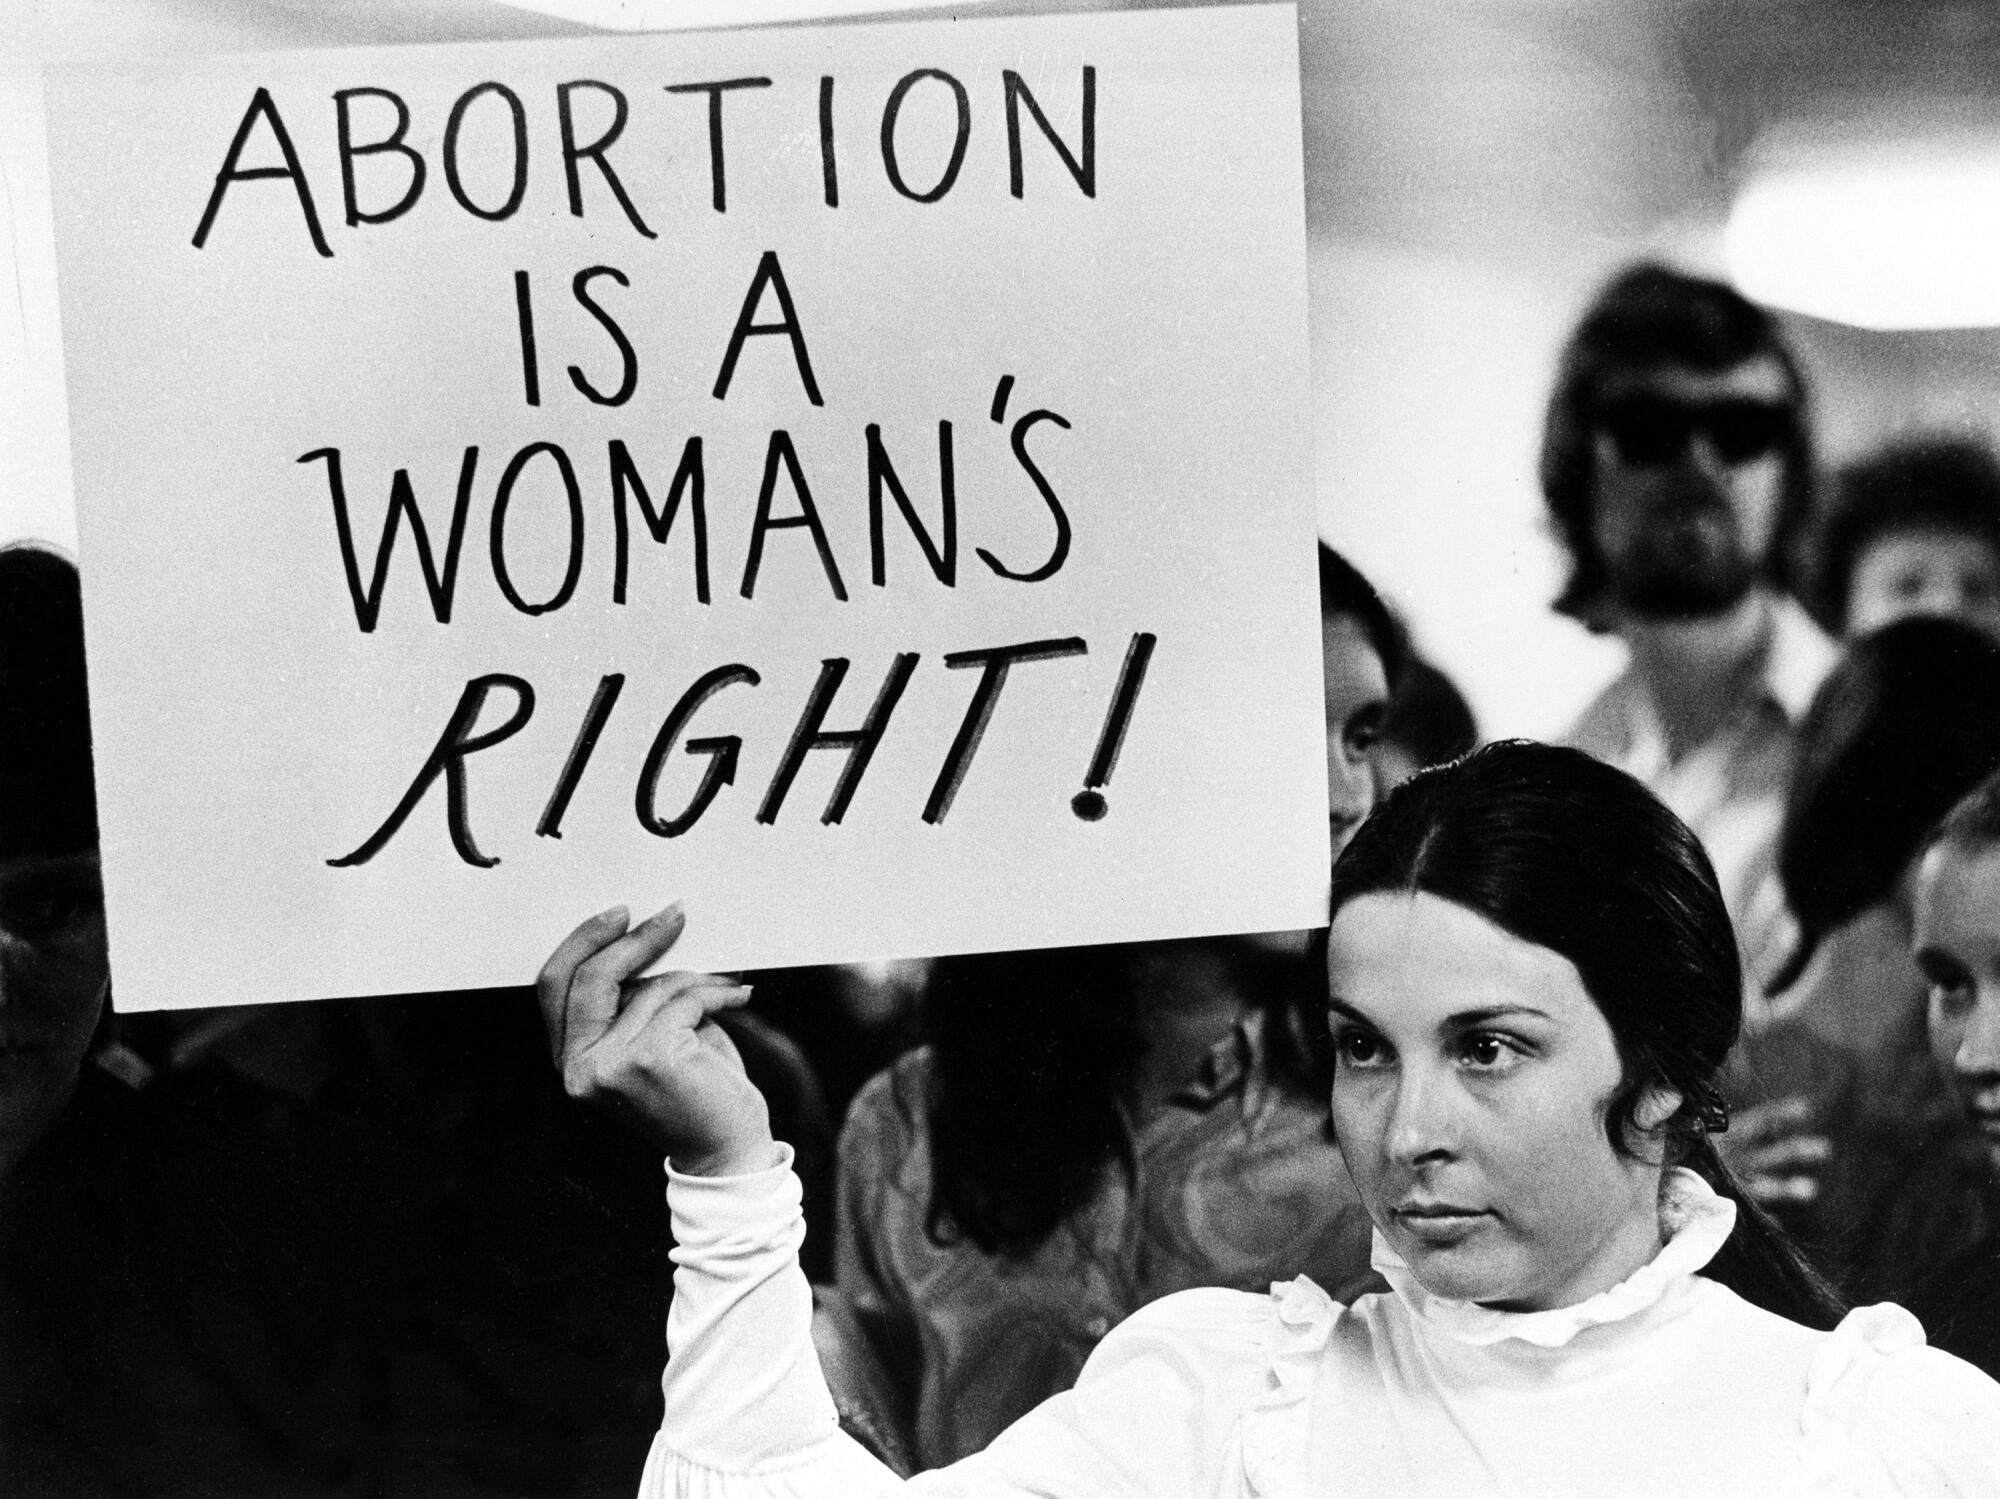 1971 photo of a young woman holding a sign demanding a woman's right to abortion